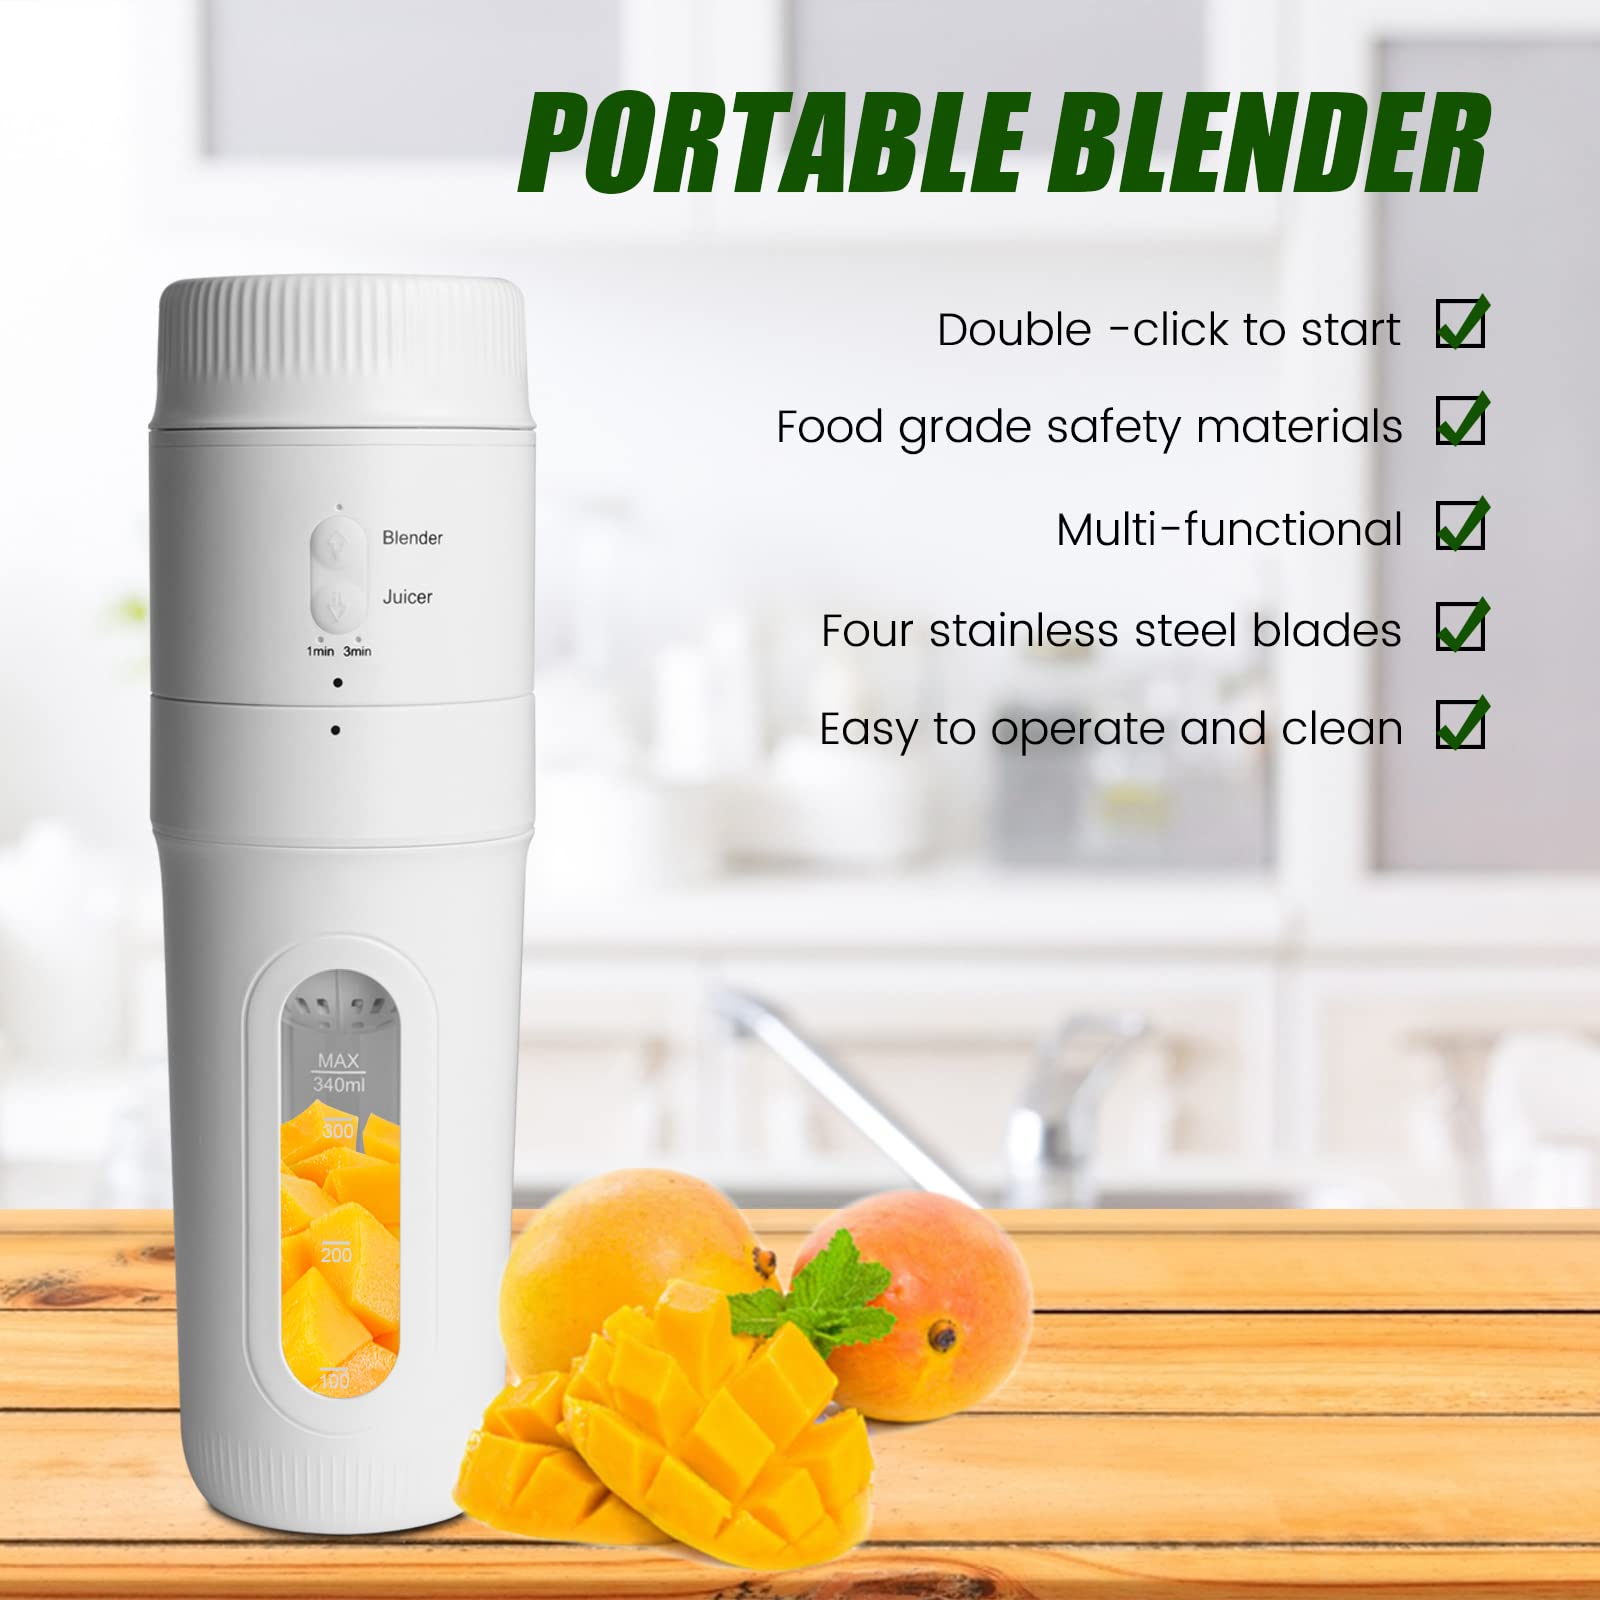 Hakka Portable Blender 3 in 1 Personal Blender, 12oz Fresh Juice Mini Blender for Shakes and Smoothies with USB Type-C Rechargeable, White